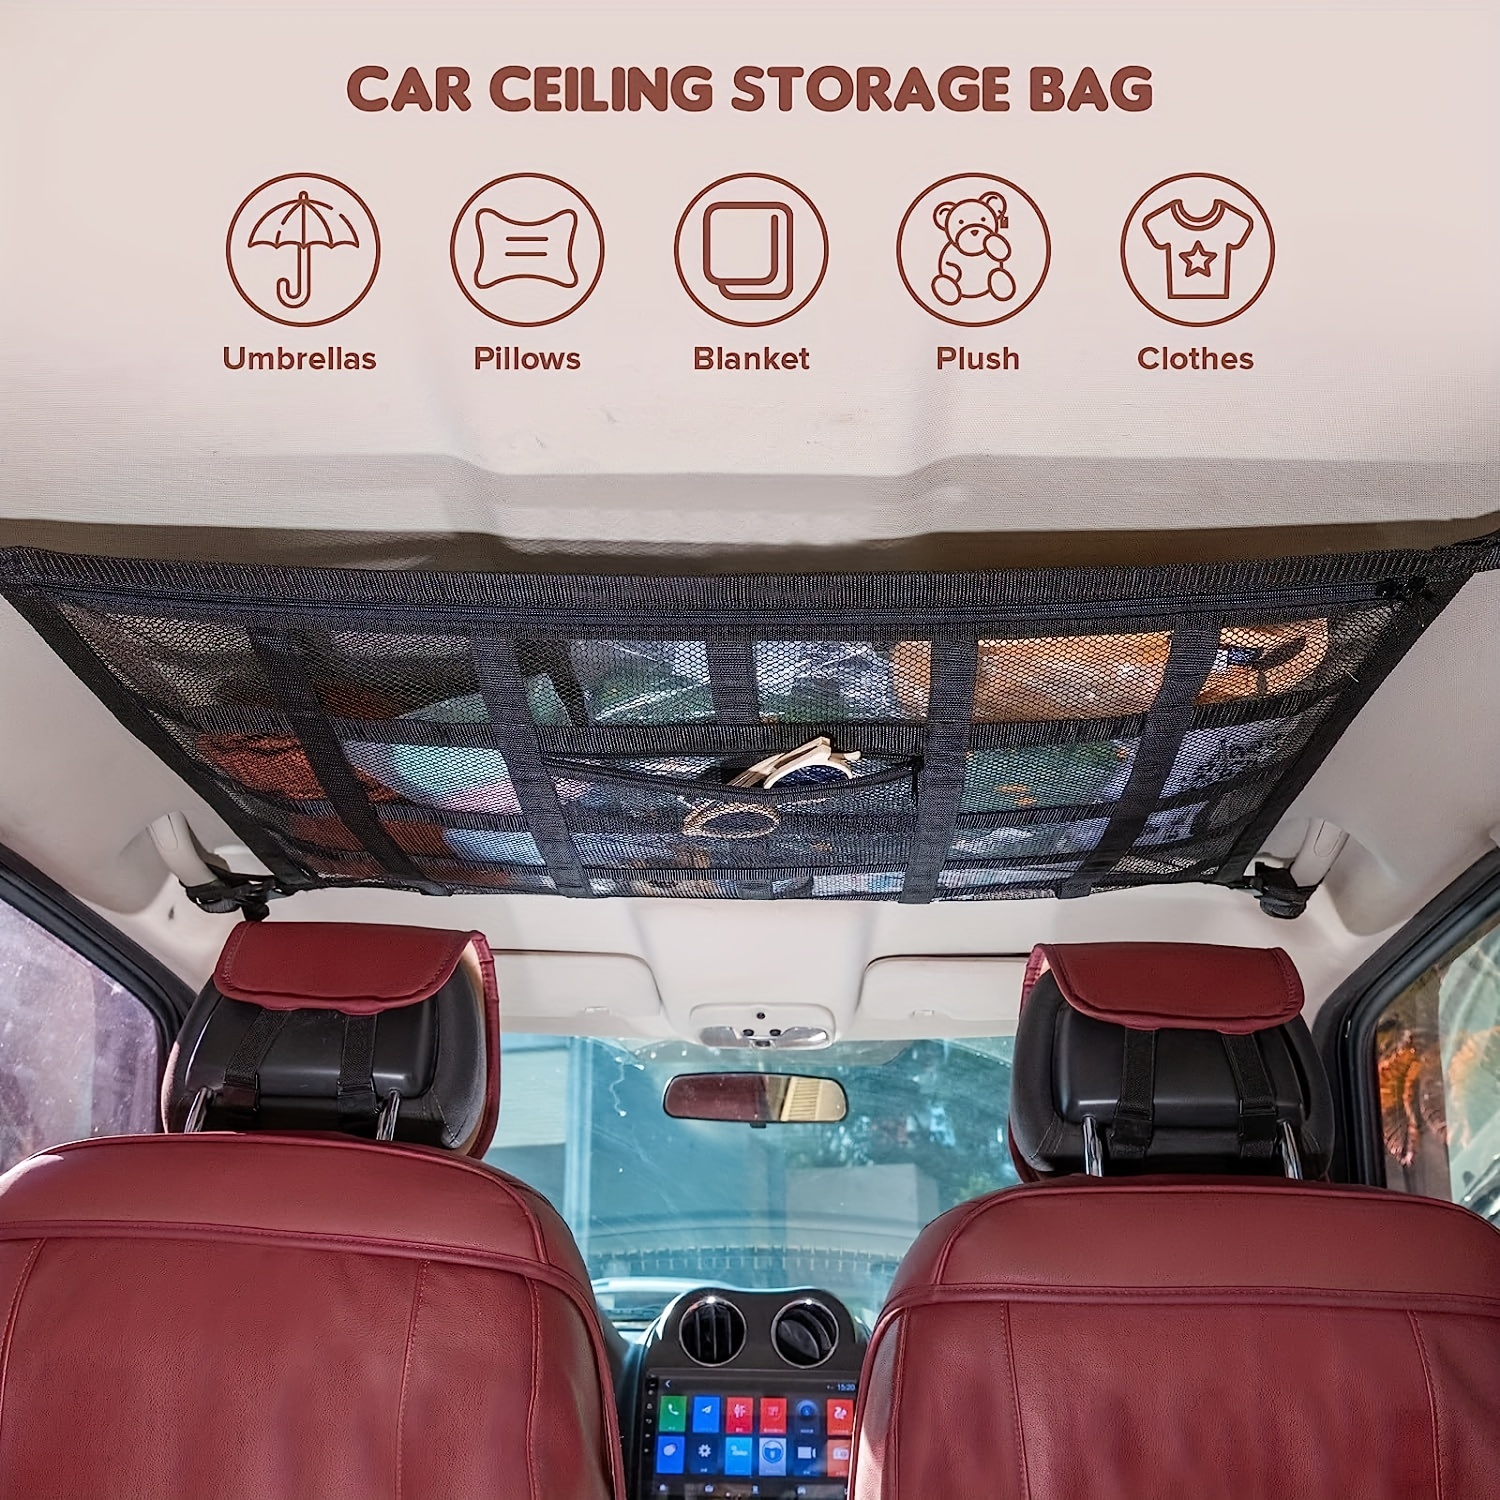 Car Ceiling Cargo Net Pocket,31.5*21.6Load-Bearing And Droop Less  Double-Layer Mesh Car Roof Storage Organizer,Truck SUV Long Road Trip Campin